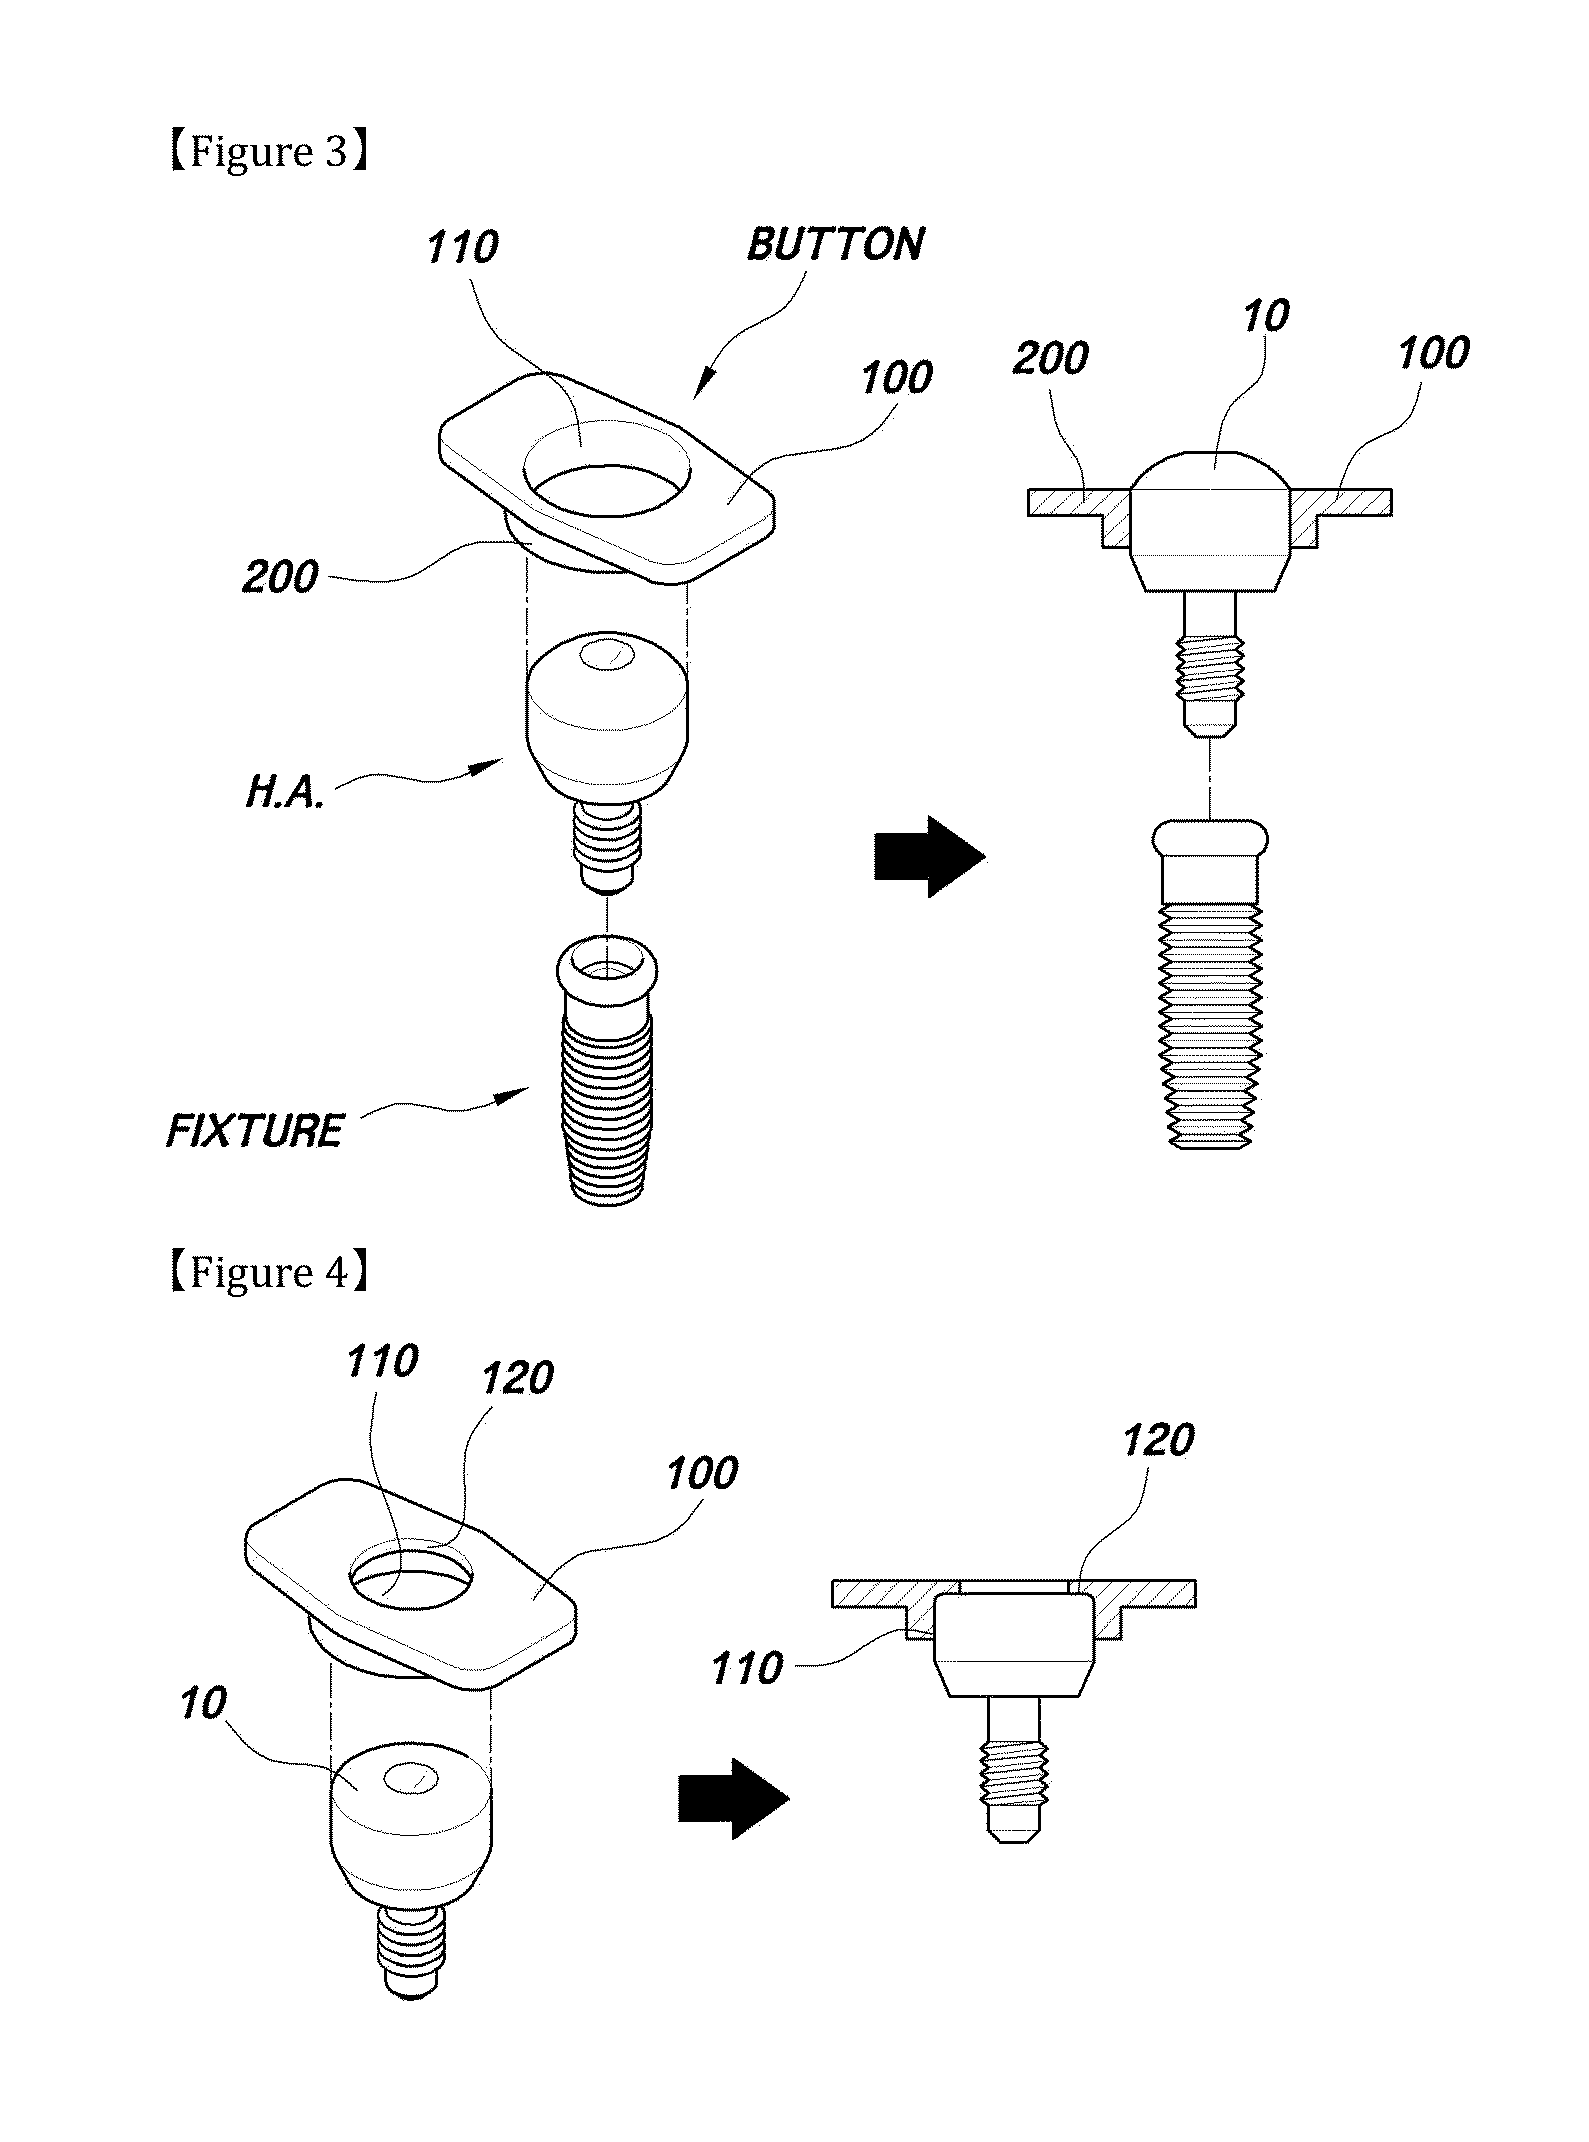 Button for implnat healing abutment and implant healing abutment having pressing part